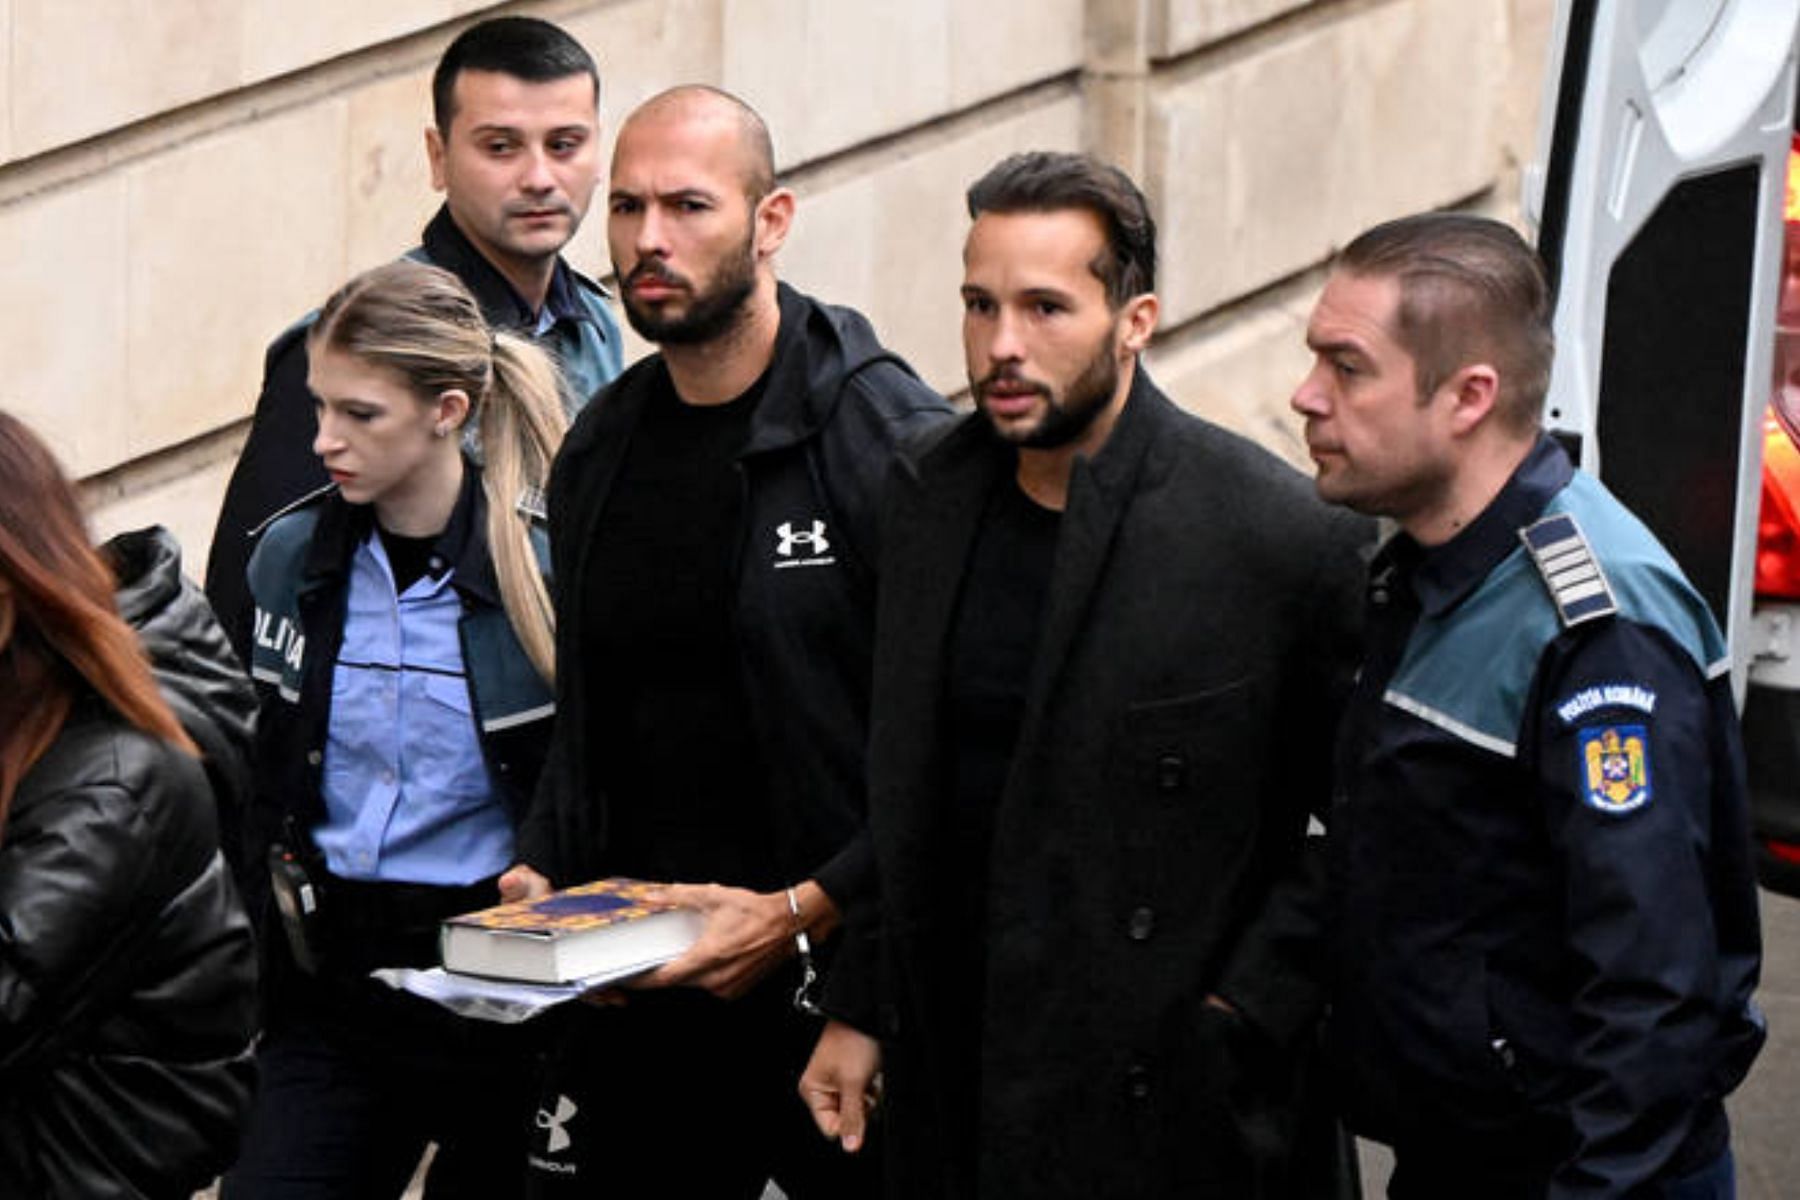 The Tate brothers on their way to the hearing on Tuesday. (Image via Vadim Ghirda/AP)